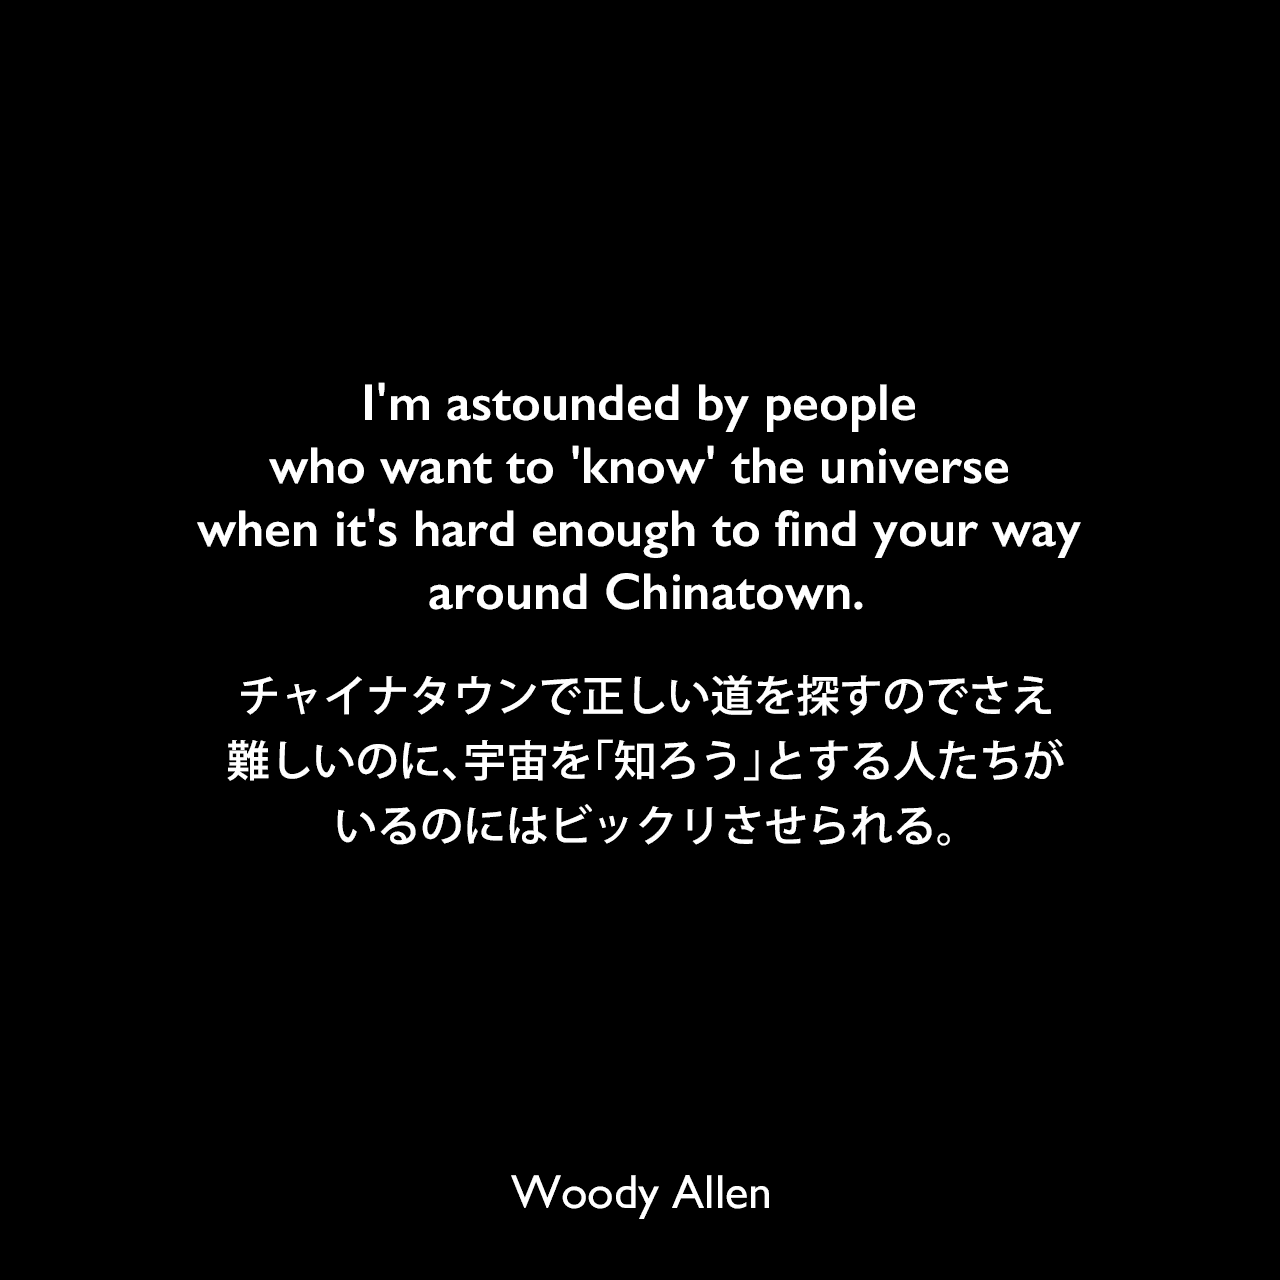 I'm astounded by people who want to 'know' the universe when it's hard enough to find your way around Chinatown.チャイナタウンで正しい道を探すのでさえ難しいのに、宇宙を「知ろう」とする人たちがいるのにはビックリさせられる。Woody Allen